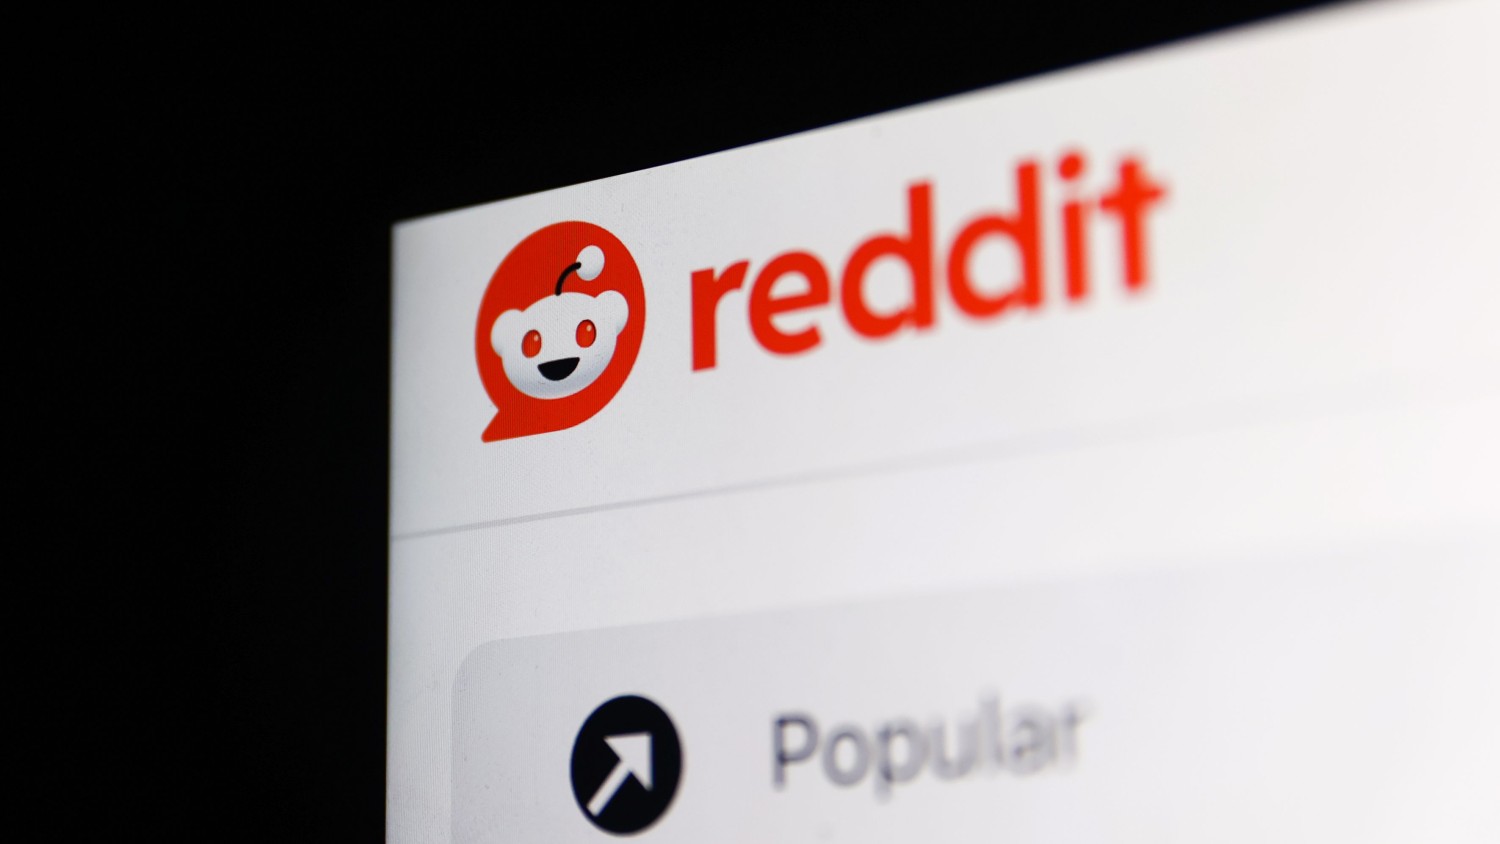 Reddit logo on the website displayed on a laptop screen. Reddit on Thursday filed to go public, nearly 20 years after its launch. Jakub Porzycki/NurPhoto/Getty Images